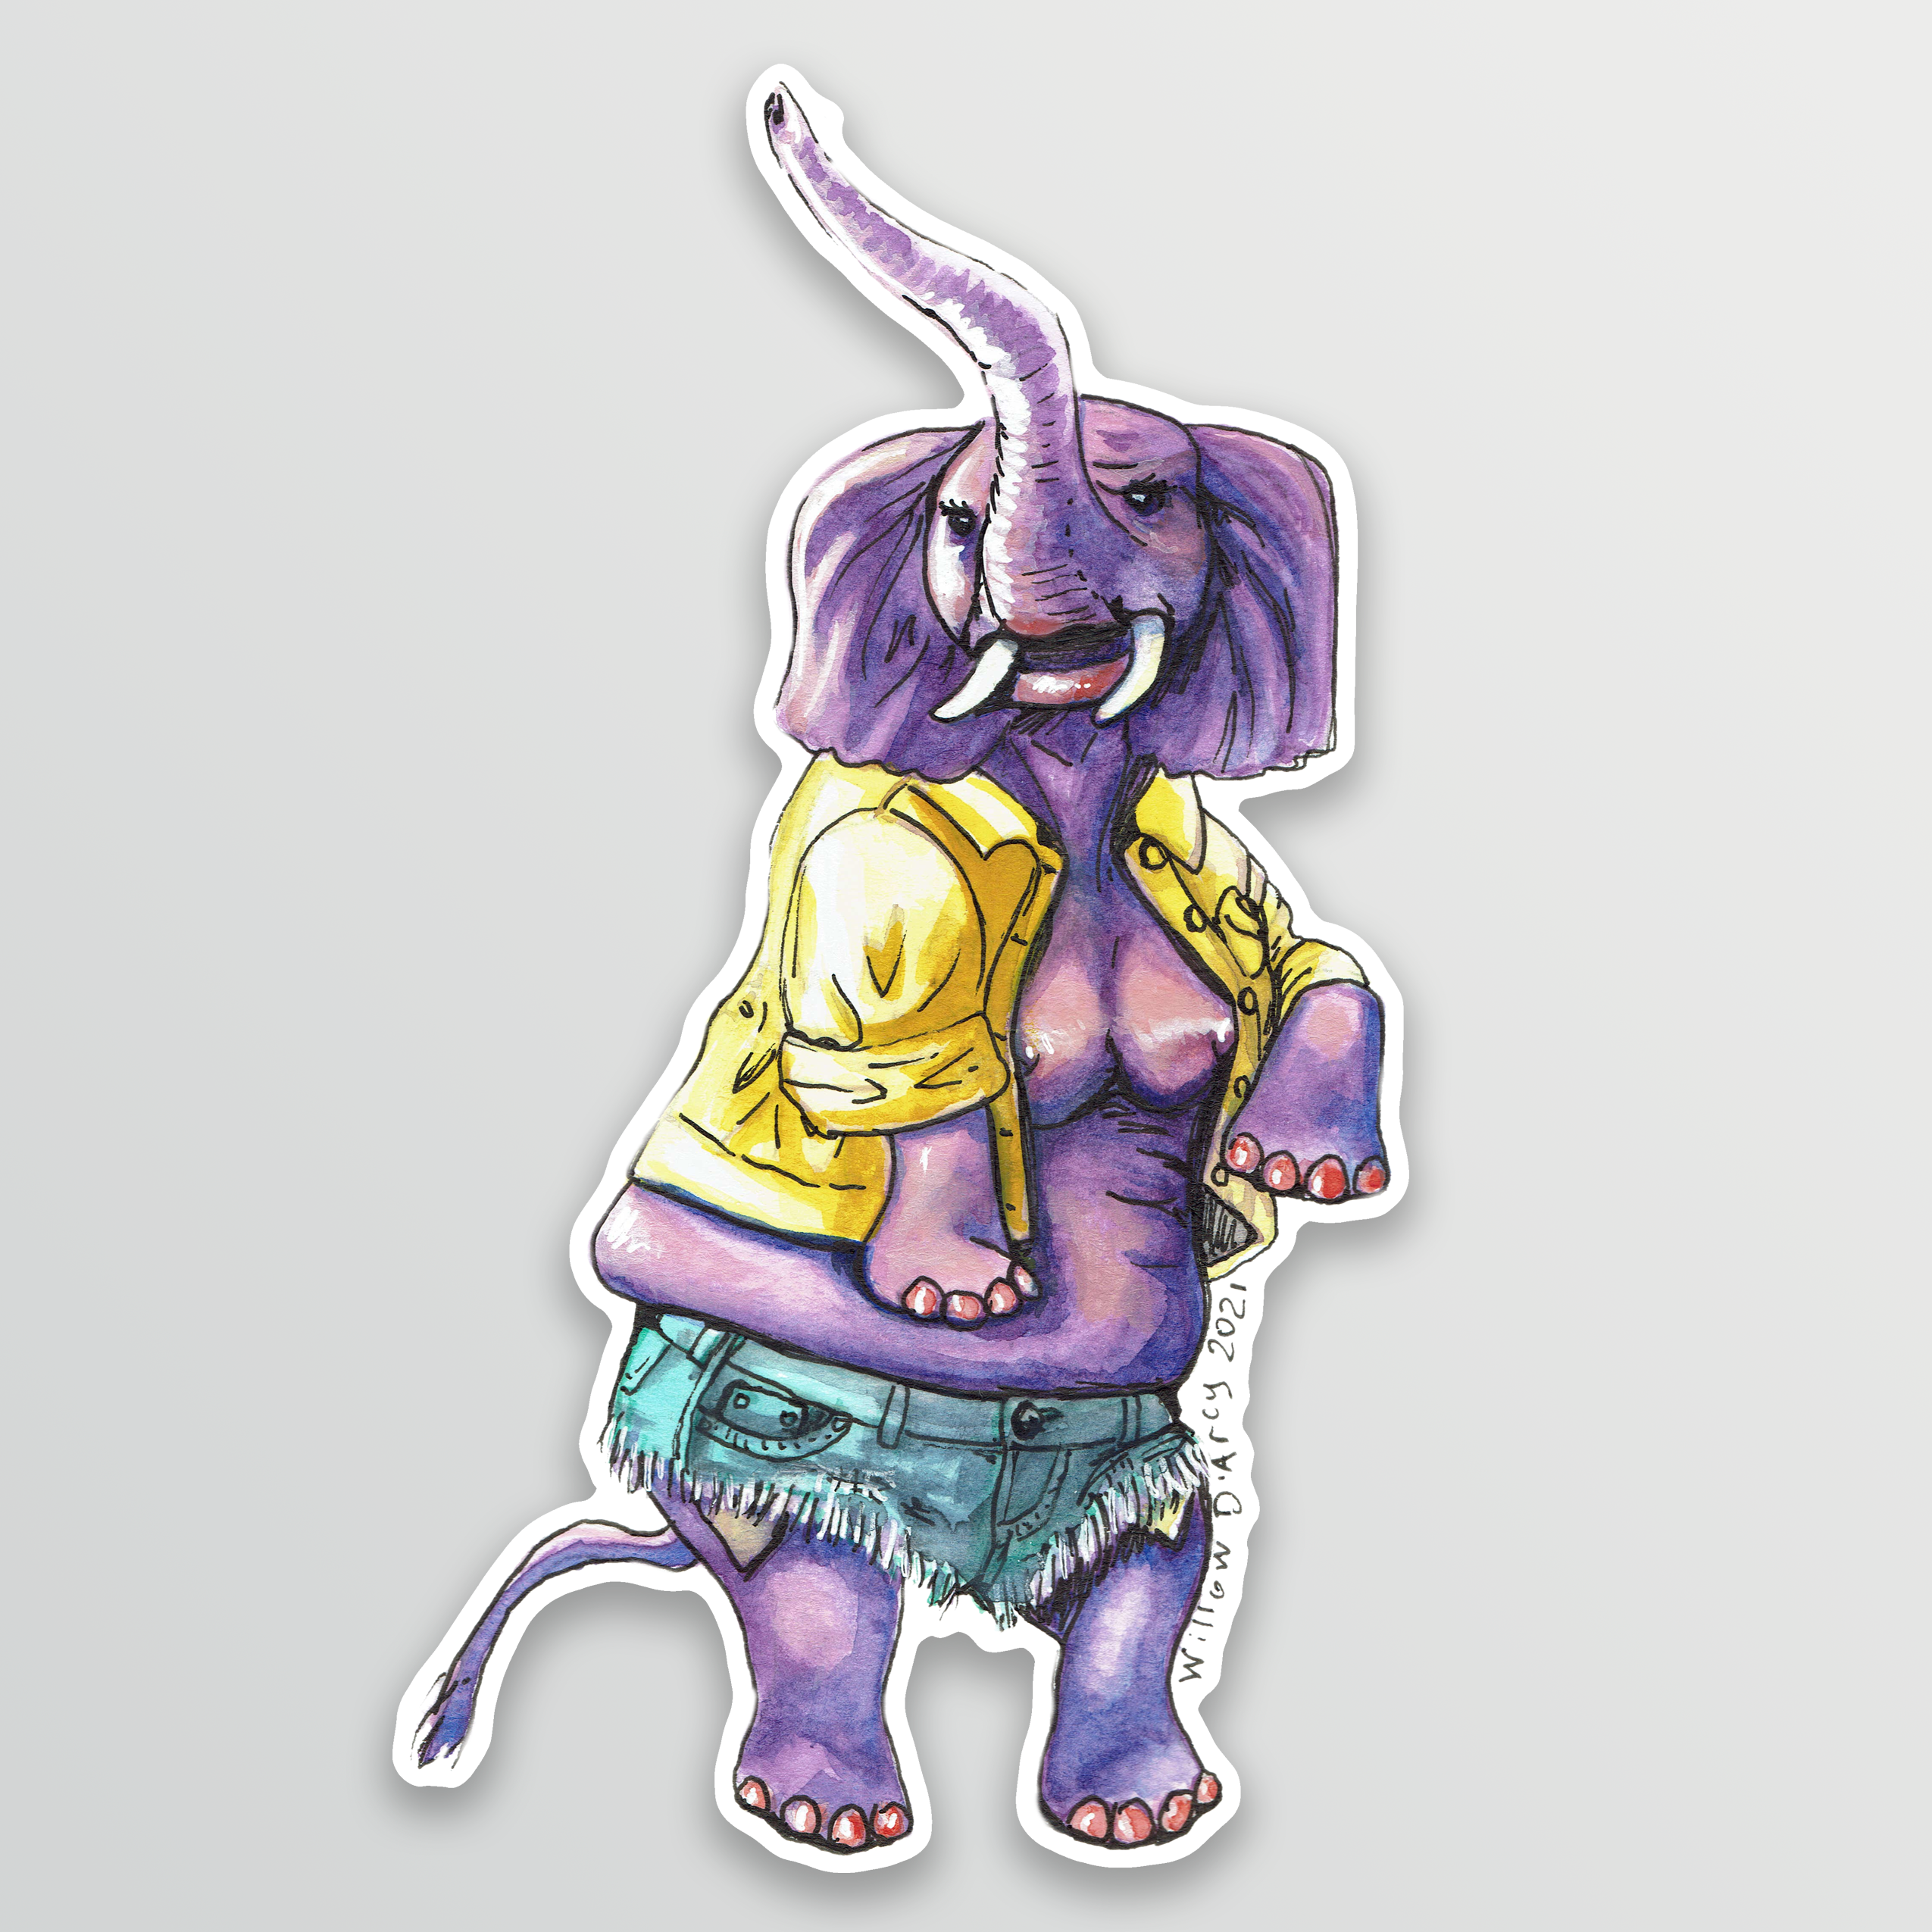 Sticker of an illustration of a sassy elephant in a cute jacket and shorts.